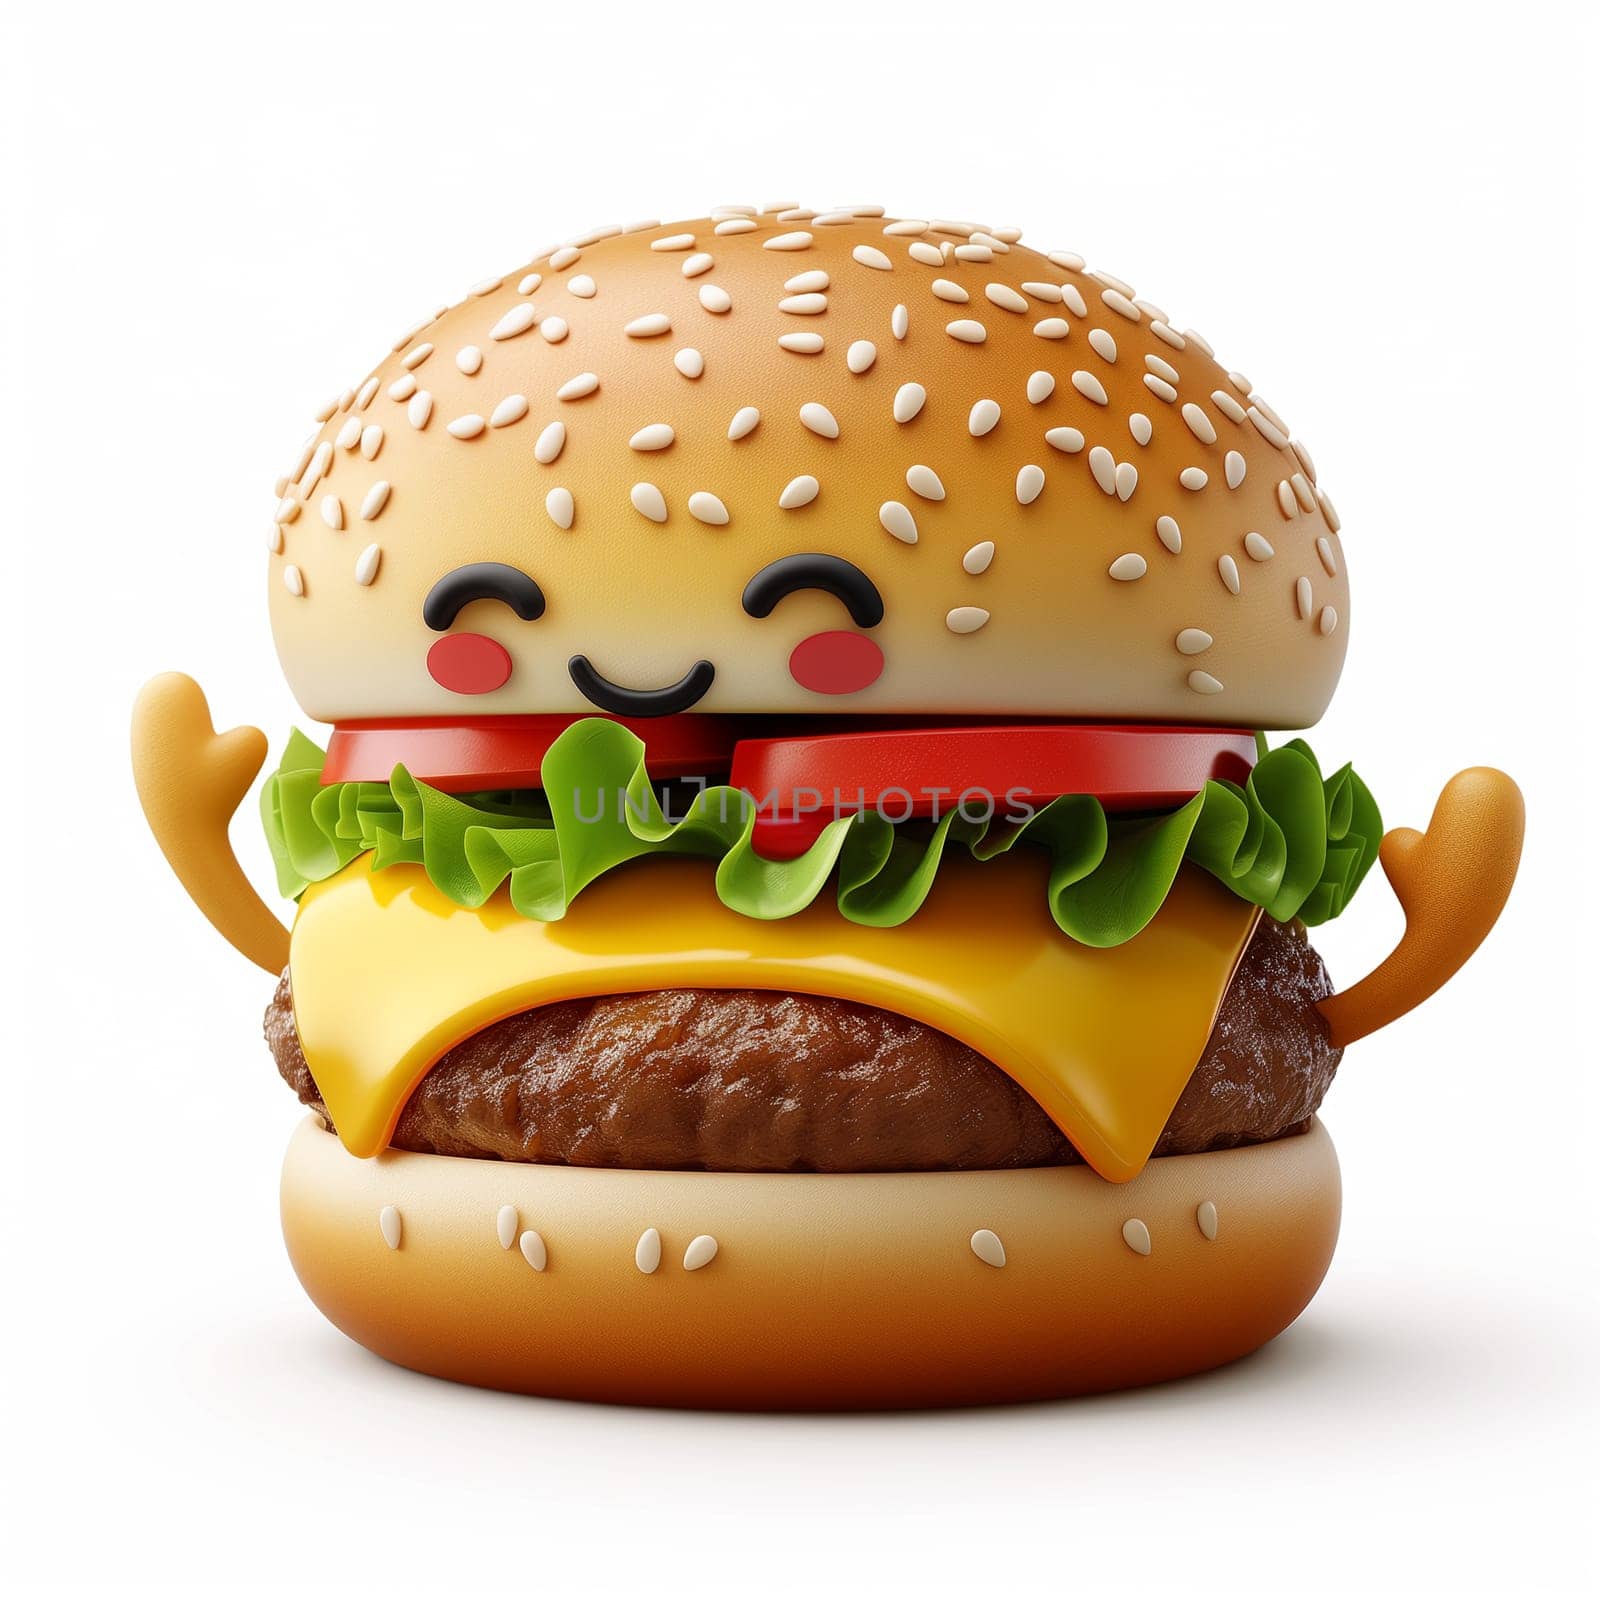 A hamburger topped with cheese and lettuce, ready to be enjoyed.